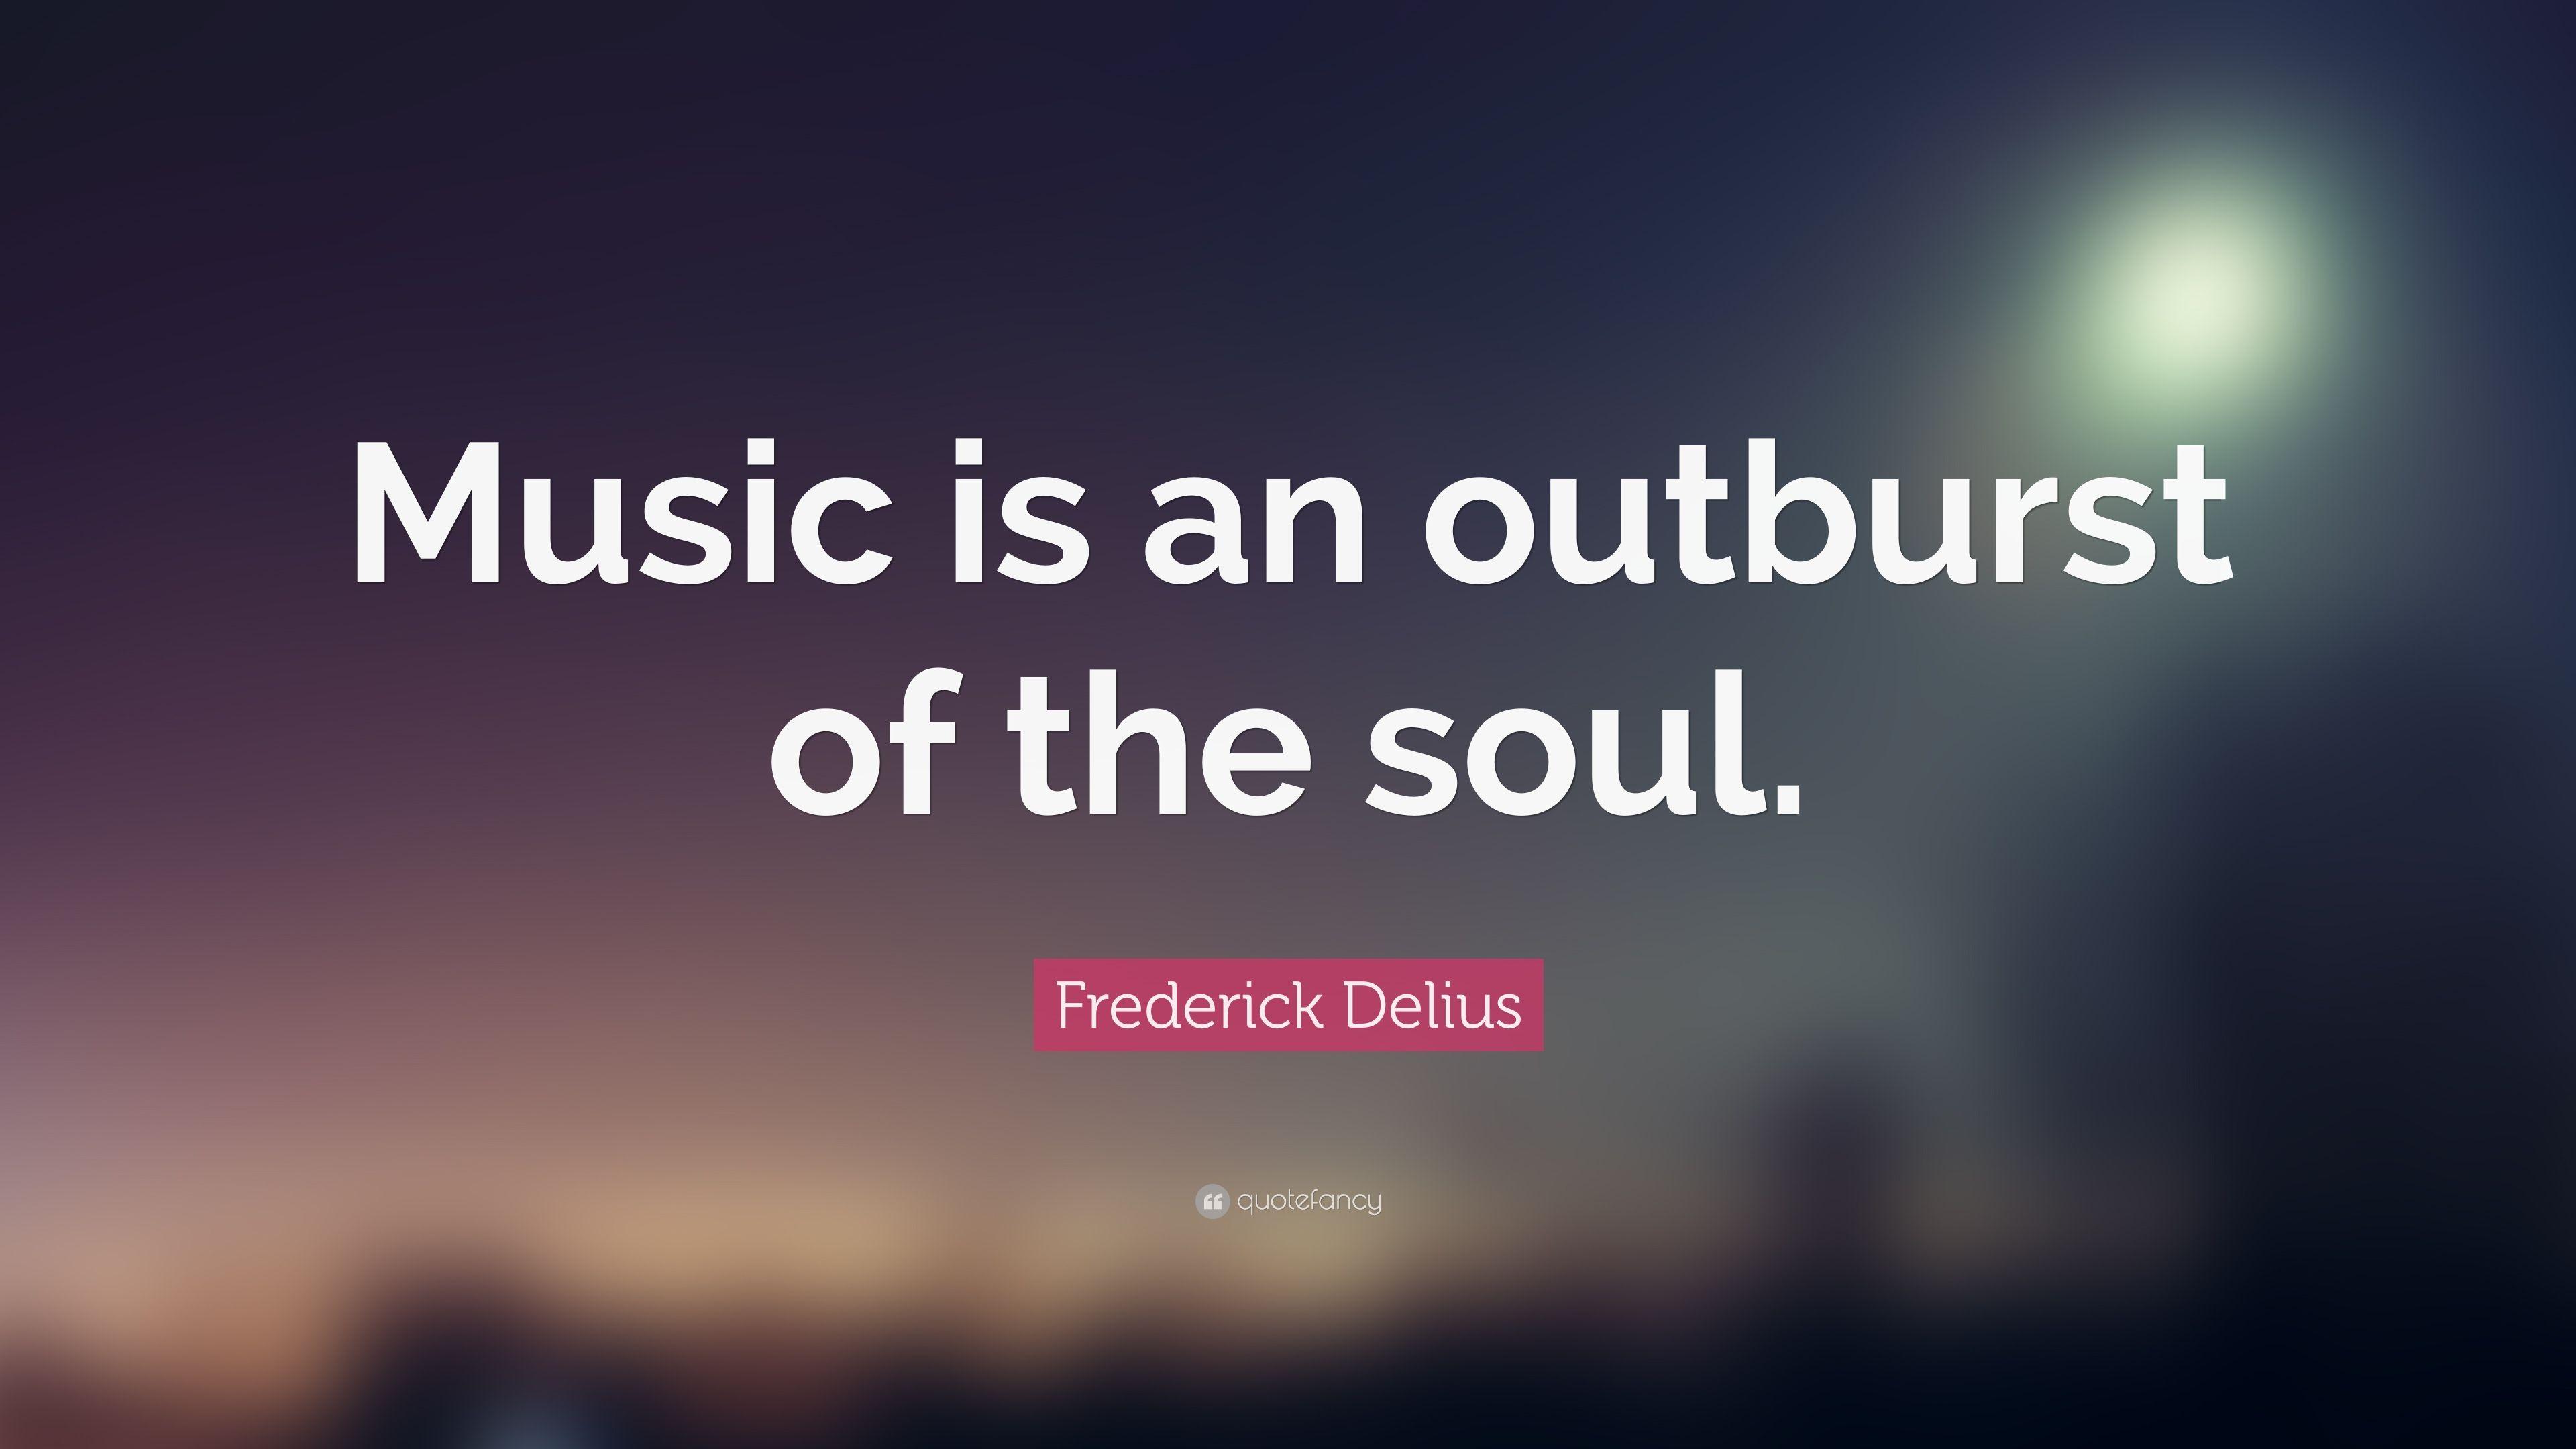 Frederick Delius Quote: “Music is an outburst of the soul.” 19